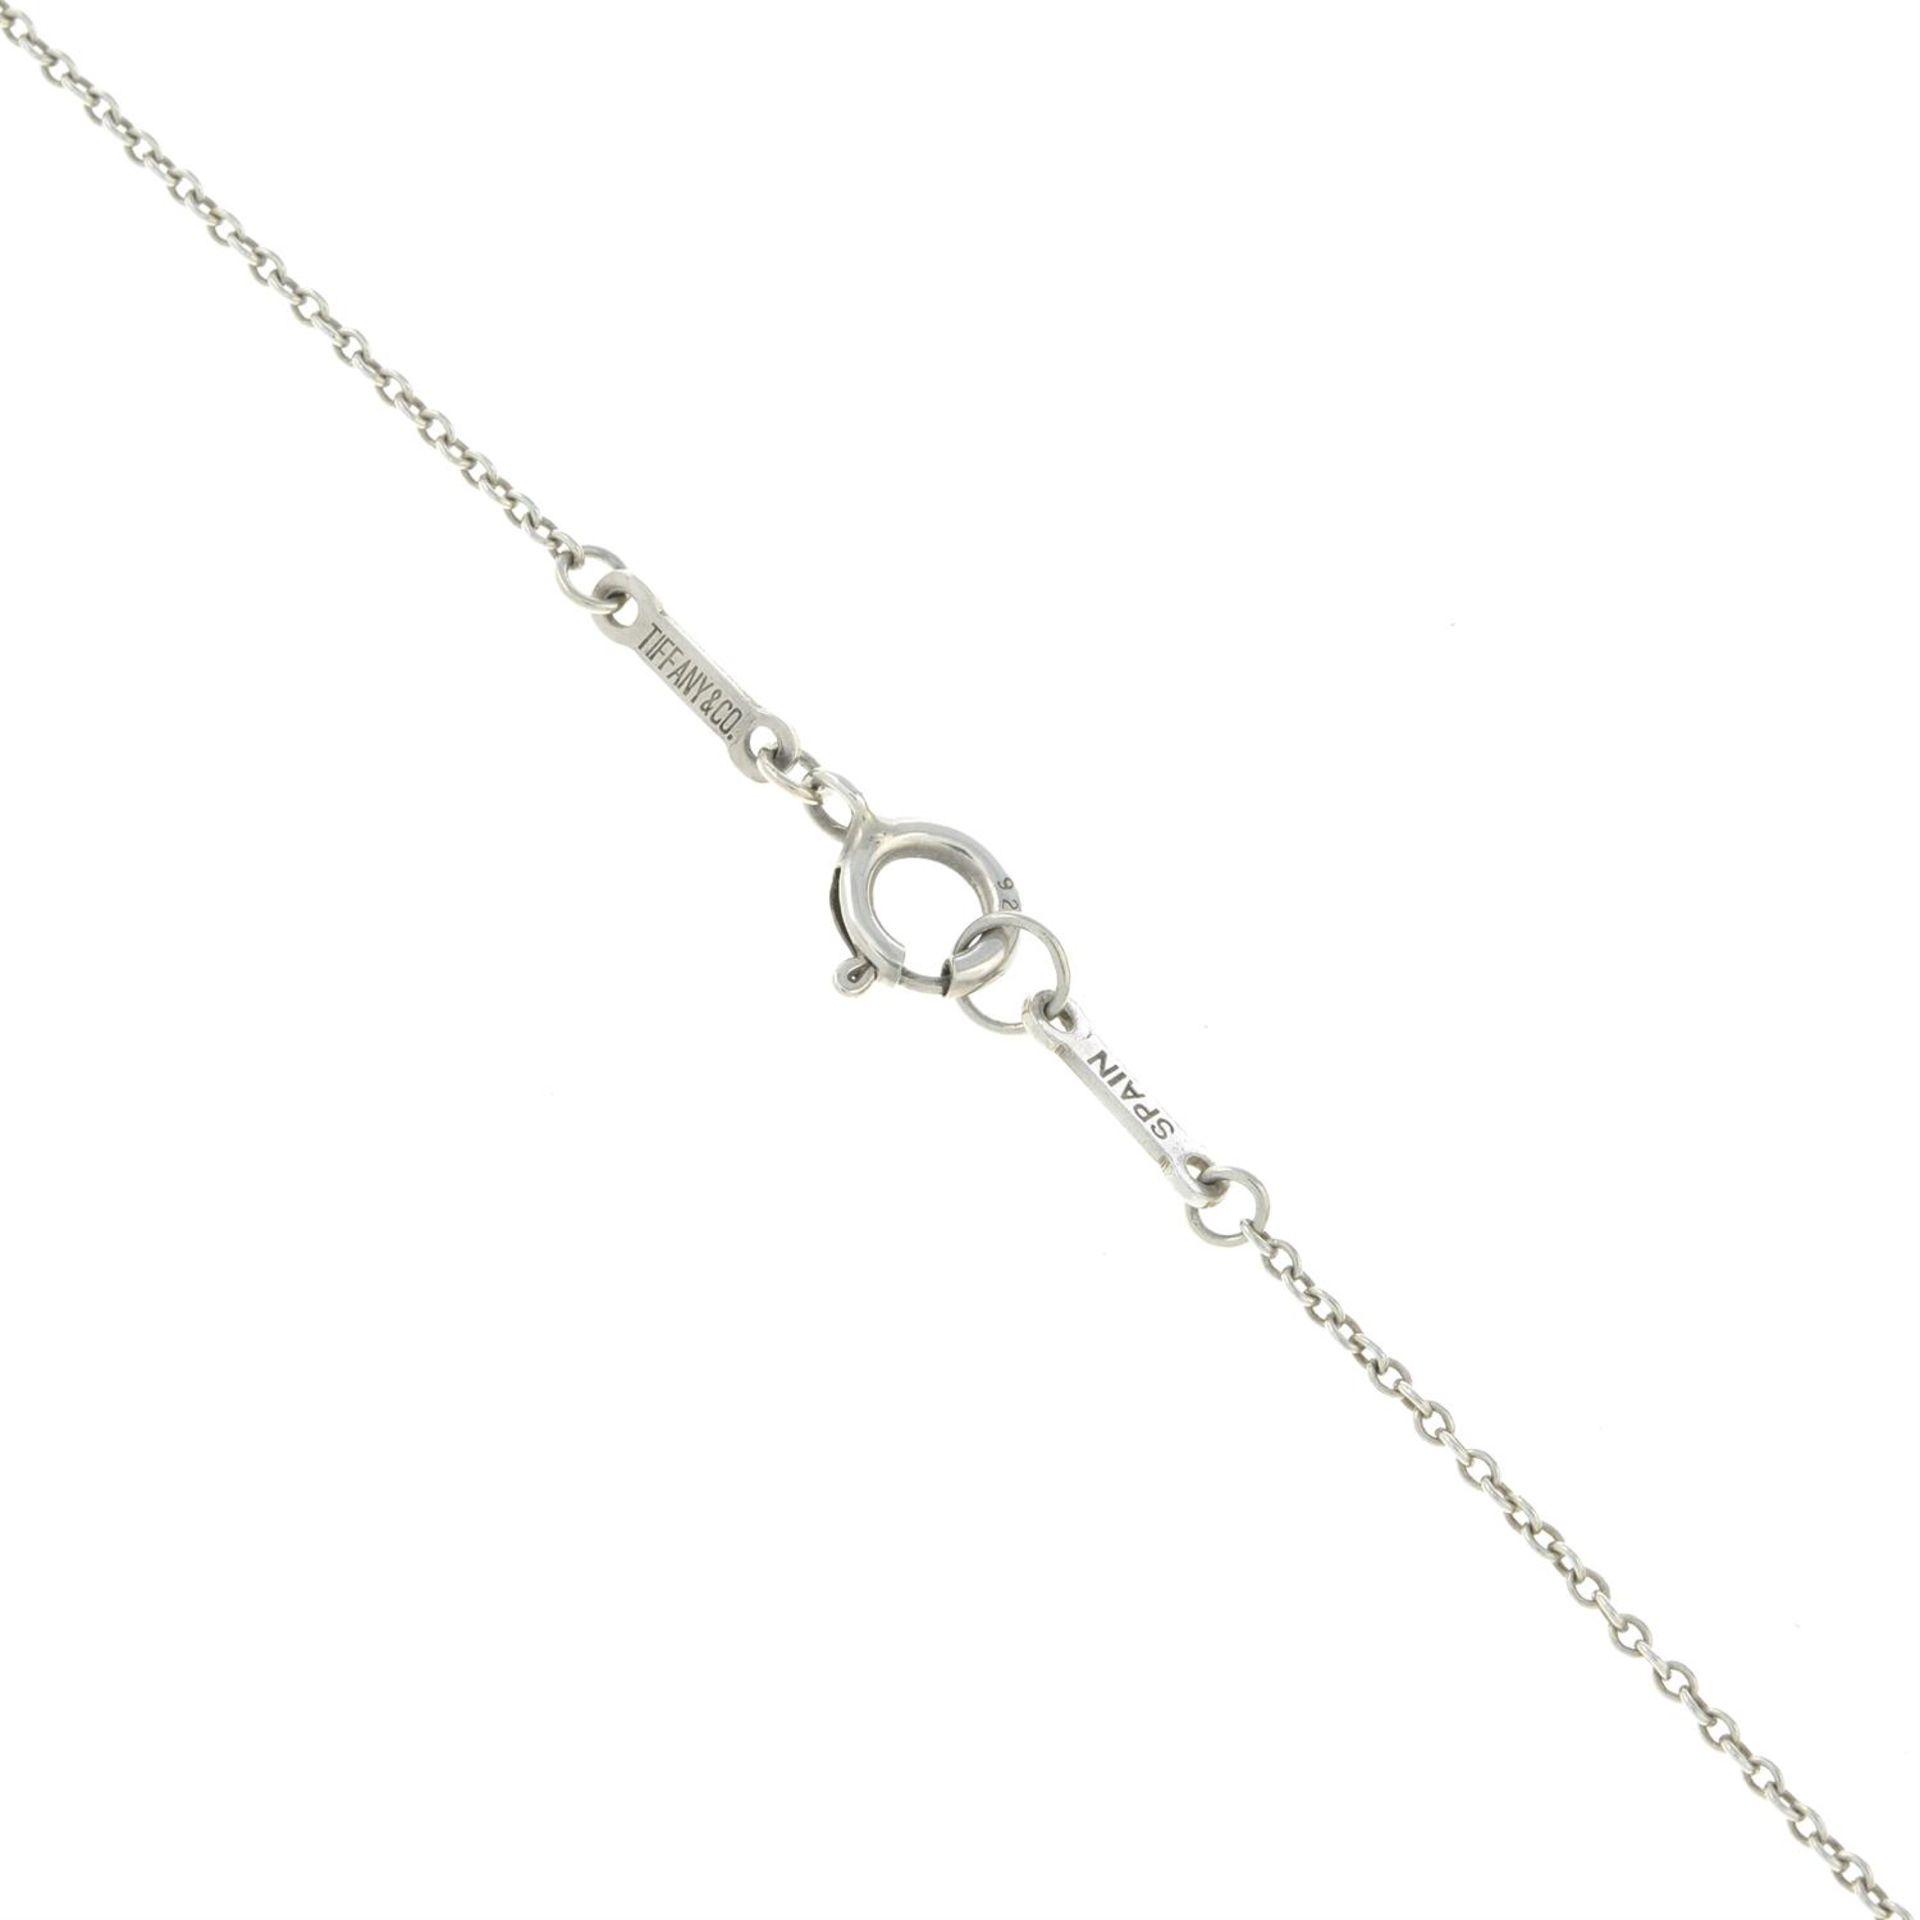 An 'open heart' pendant, with chain, by Elsa Peretti for Tiffany & Co. - Image 3 of 4